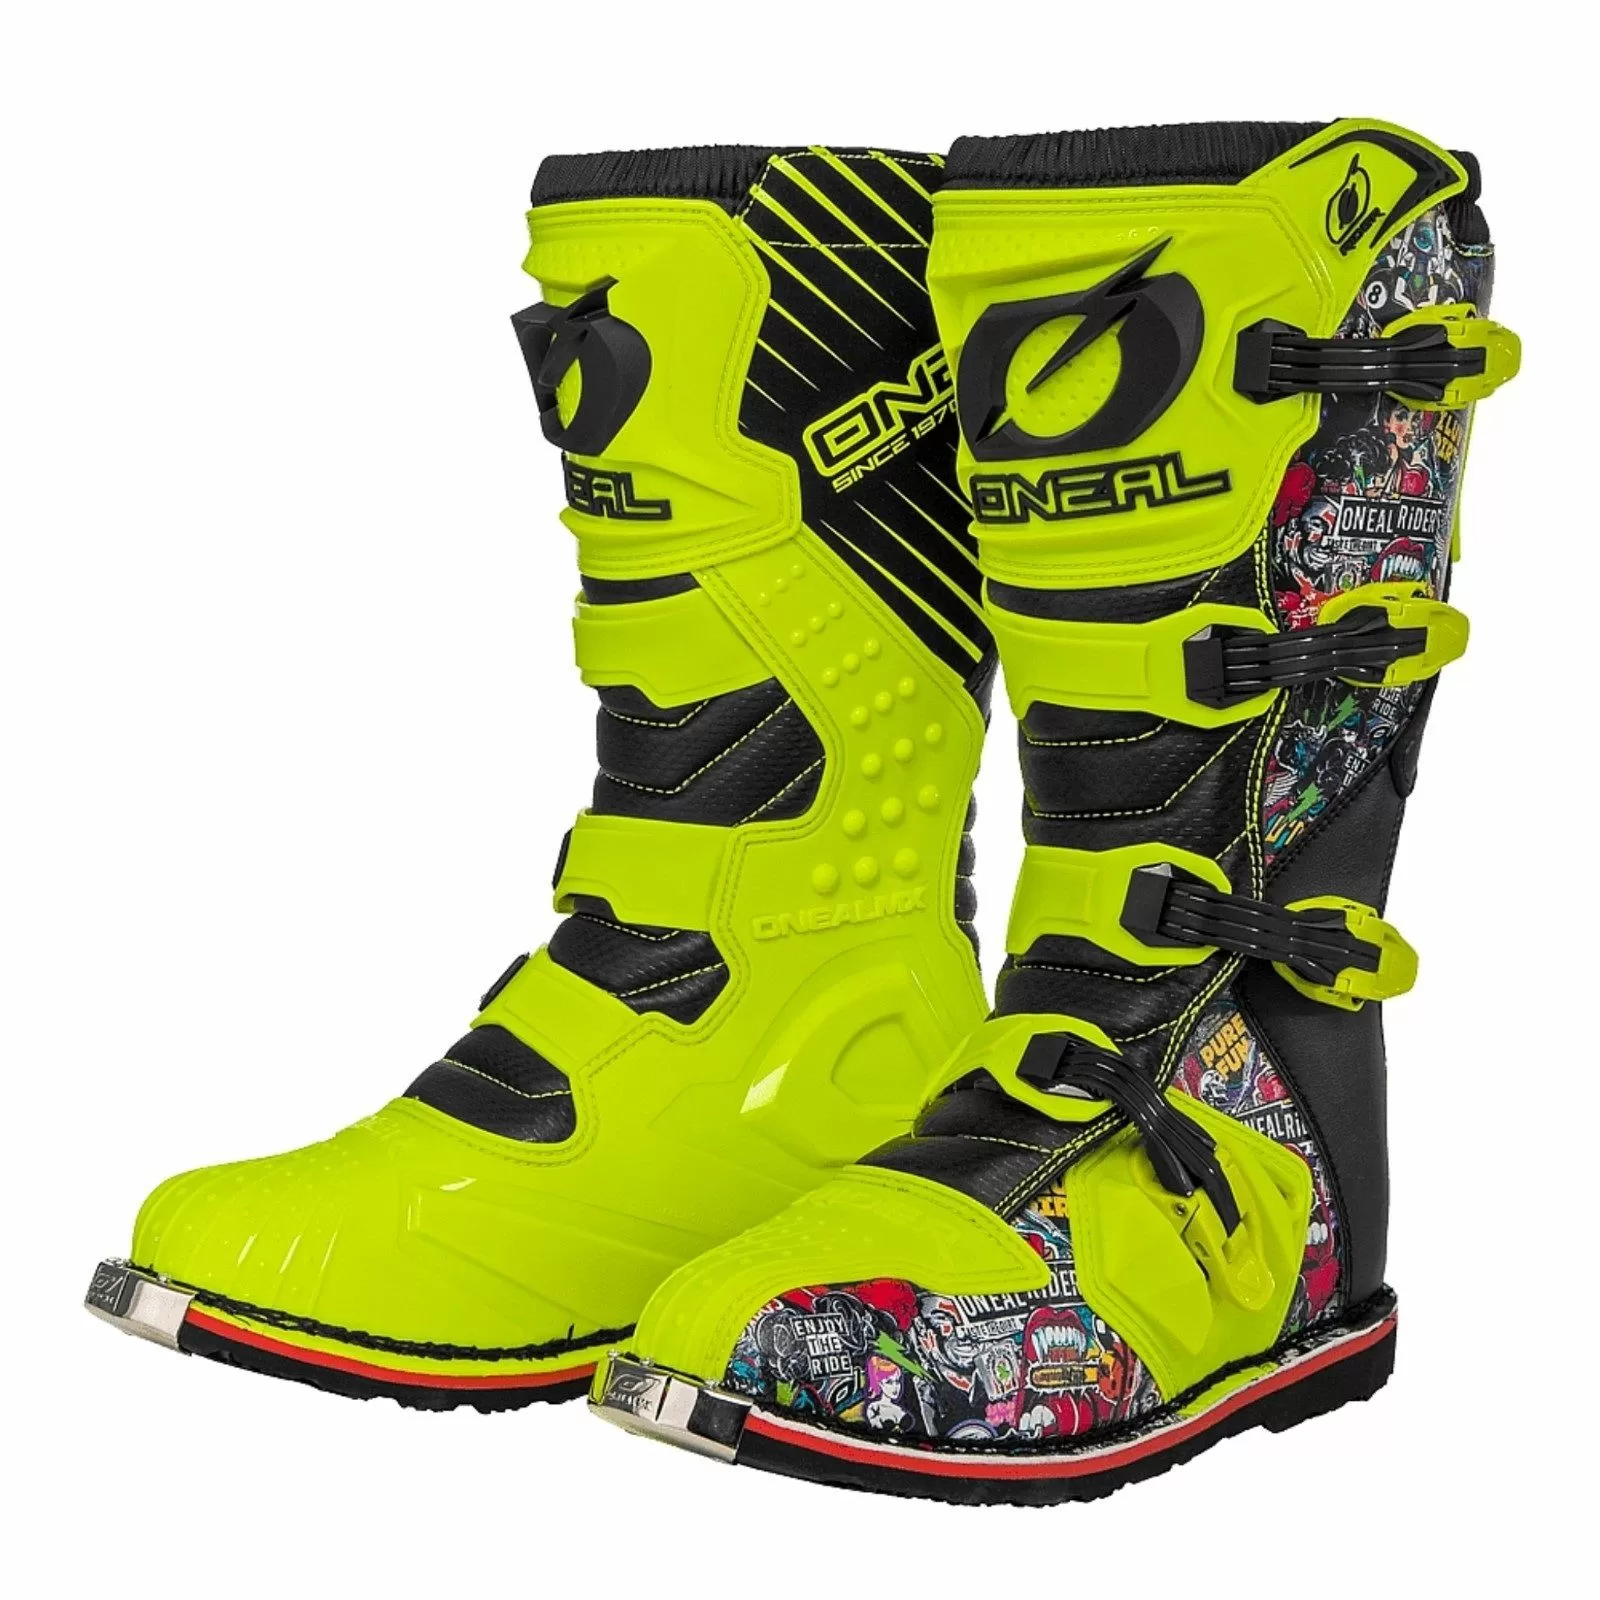 Мотоботы ONEAL RIDER BOOT yellow 